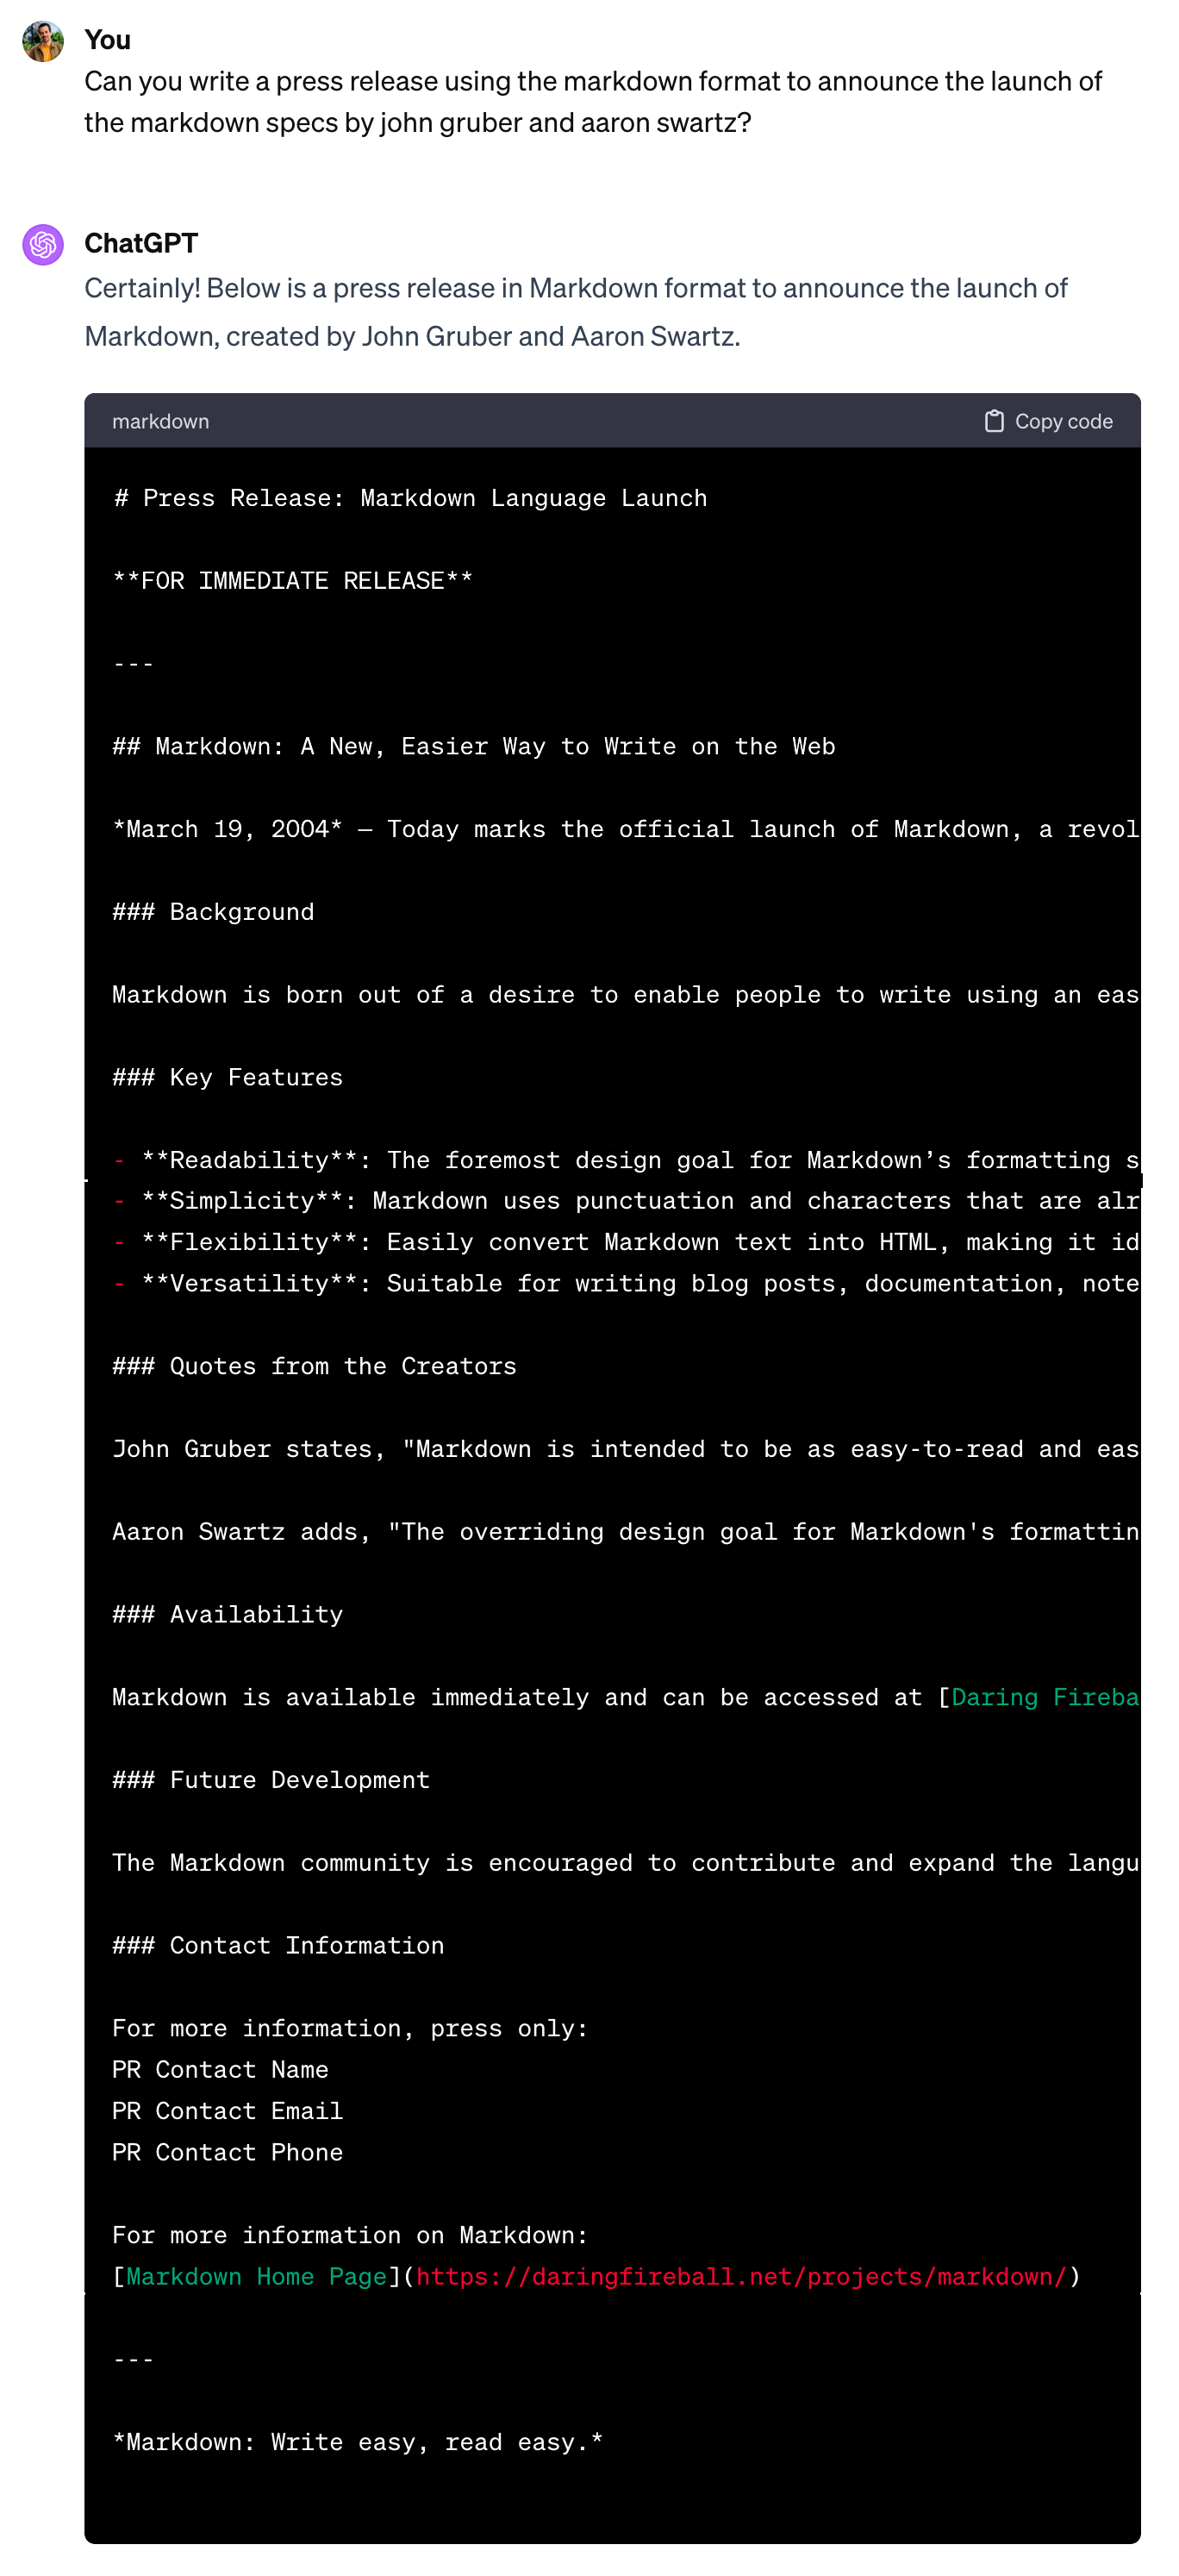 example of chatgpt responding with markdown to the prompt &ldquo;Can you write a press release using the markdown format to announce the launch of the markdown specs by john gruber and aaron swartz?&rdquo;